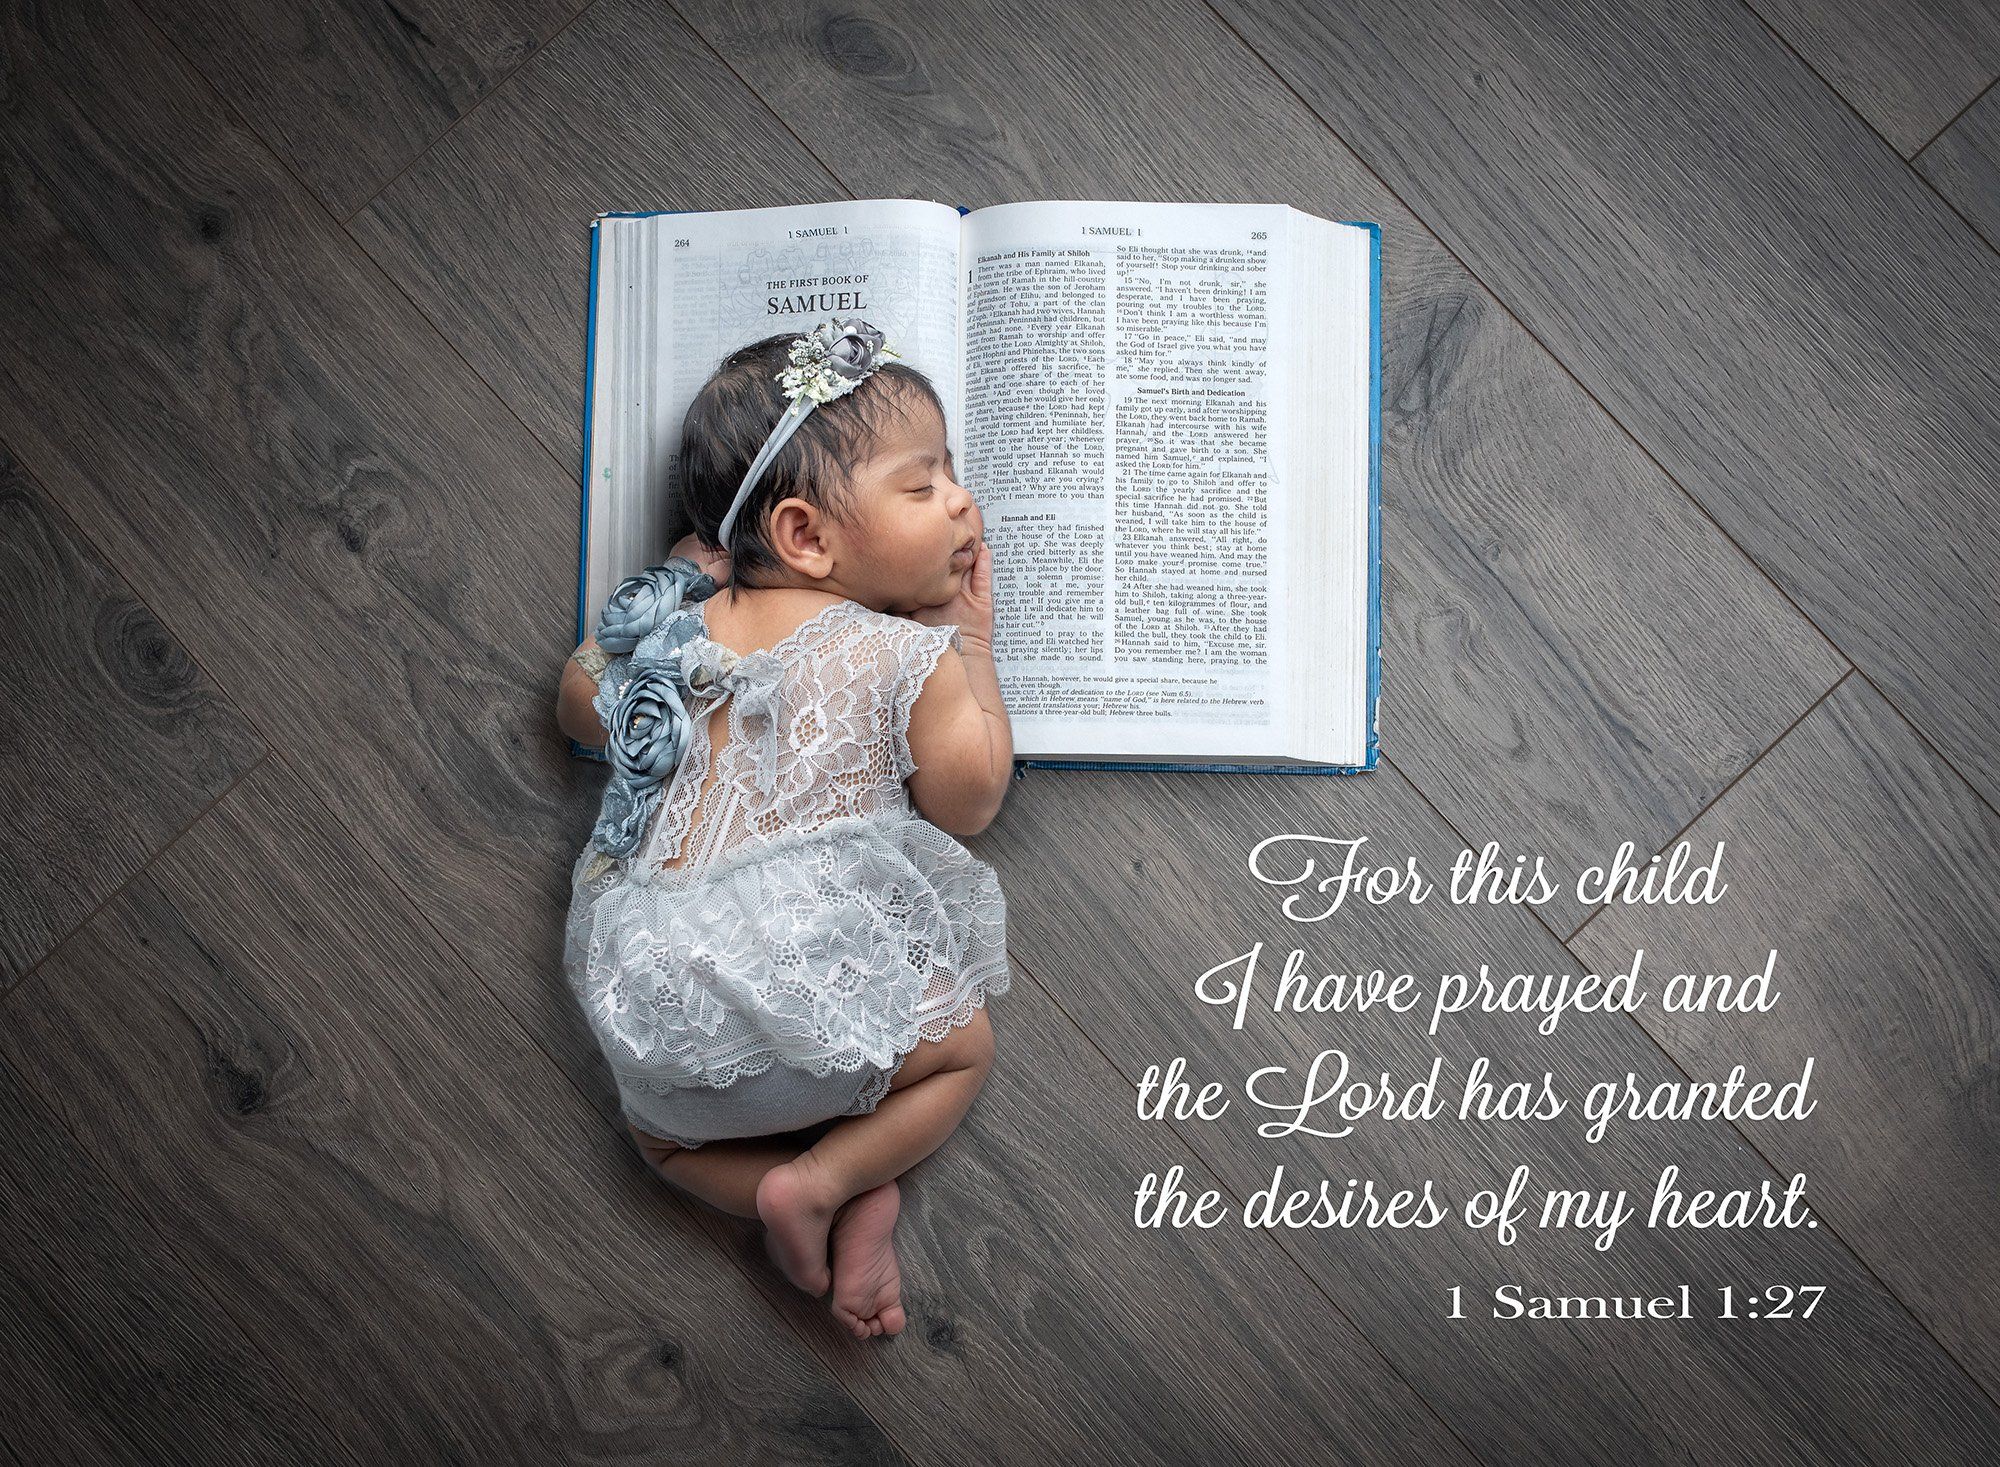 newborn baby girl dressed in floral lace grey dress sound asleep with her head on the Bible including bible quote on wooden background